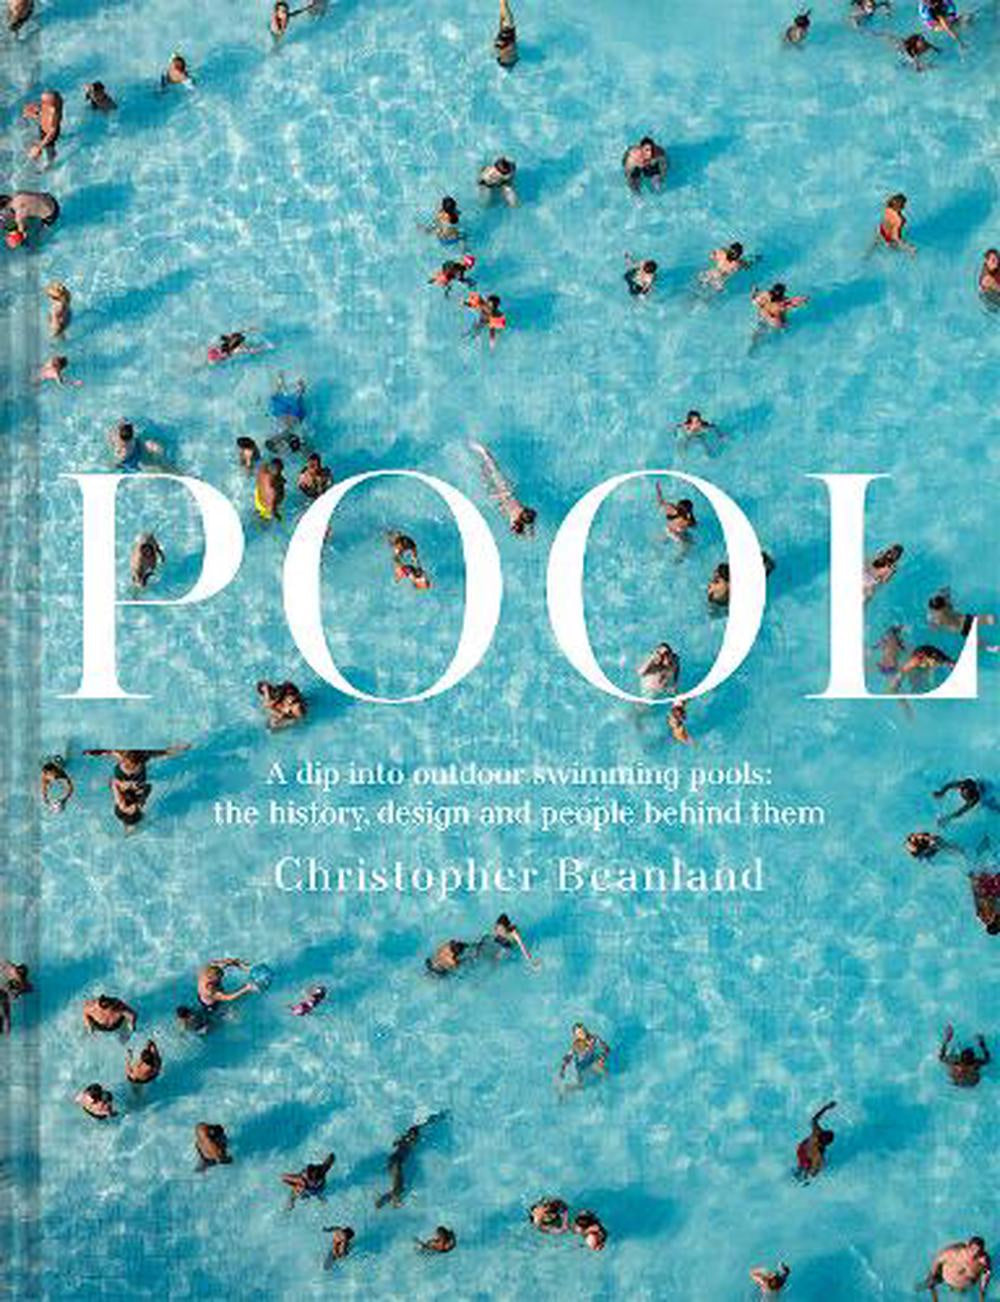 Pool: A dip into outdoor swimming pools